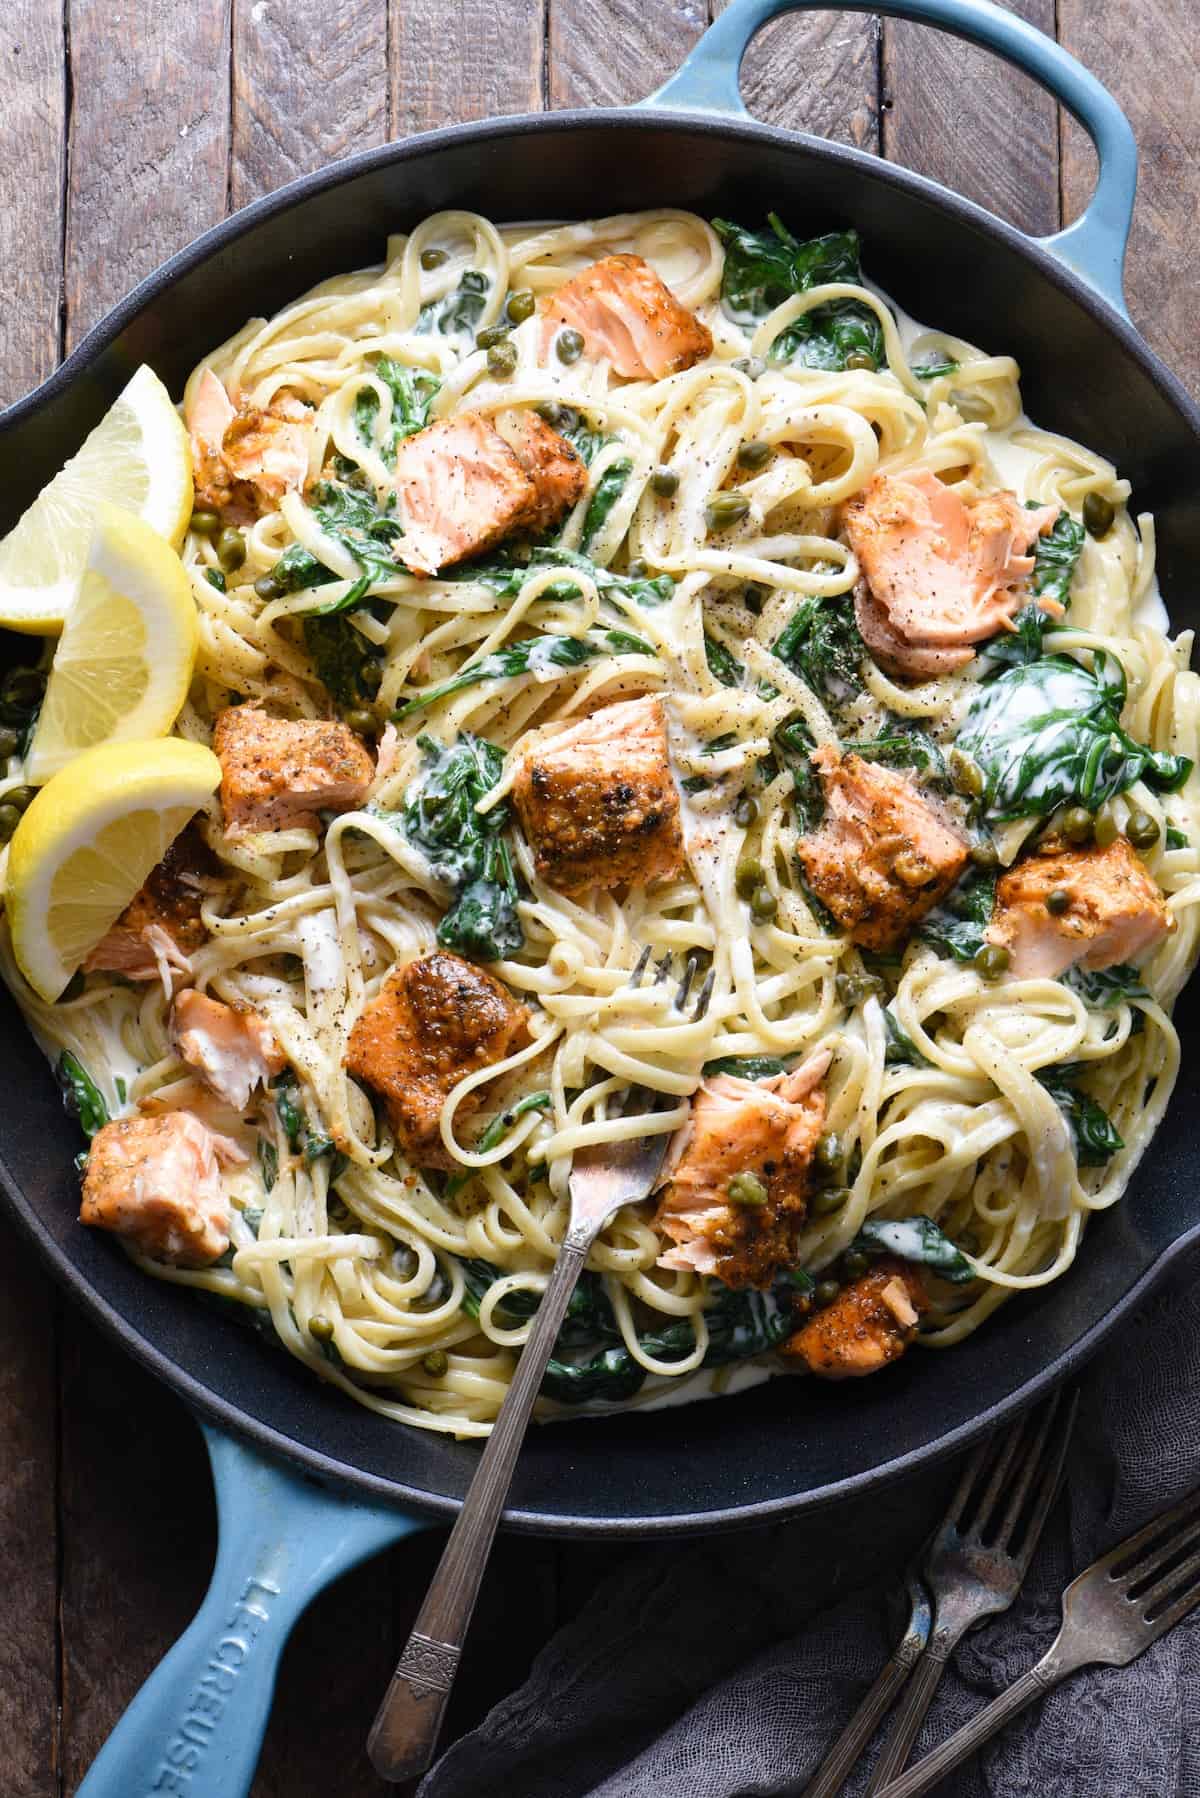 A top down view of creamy salmon pasta with spinach in a cast iron skillet on a wooden table.